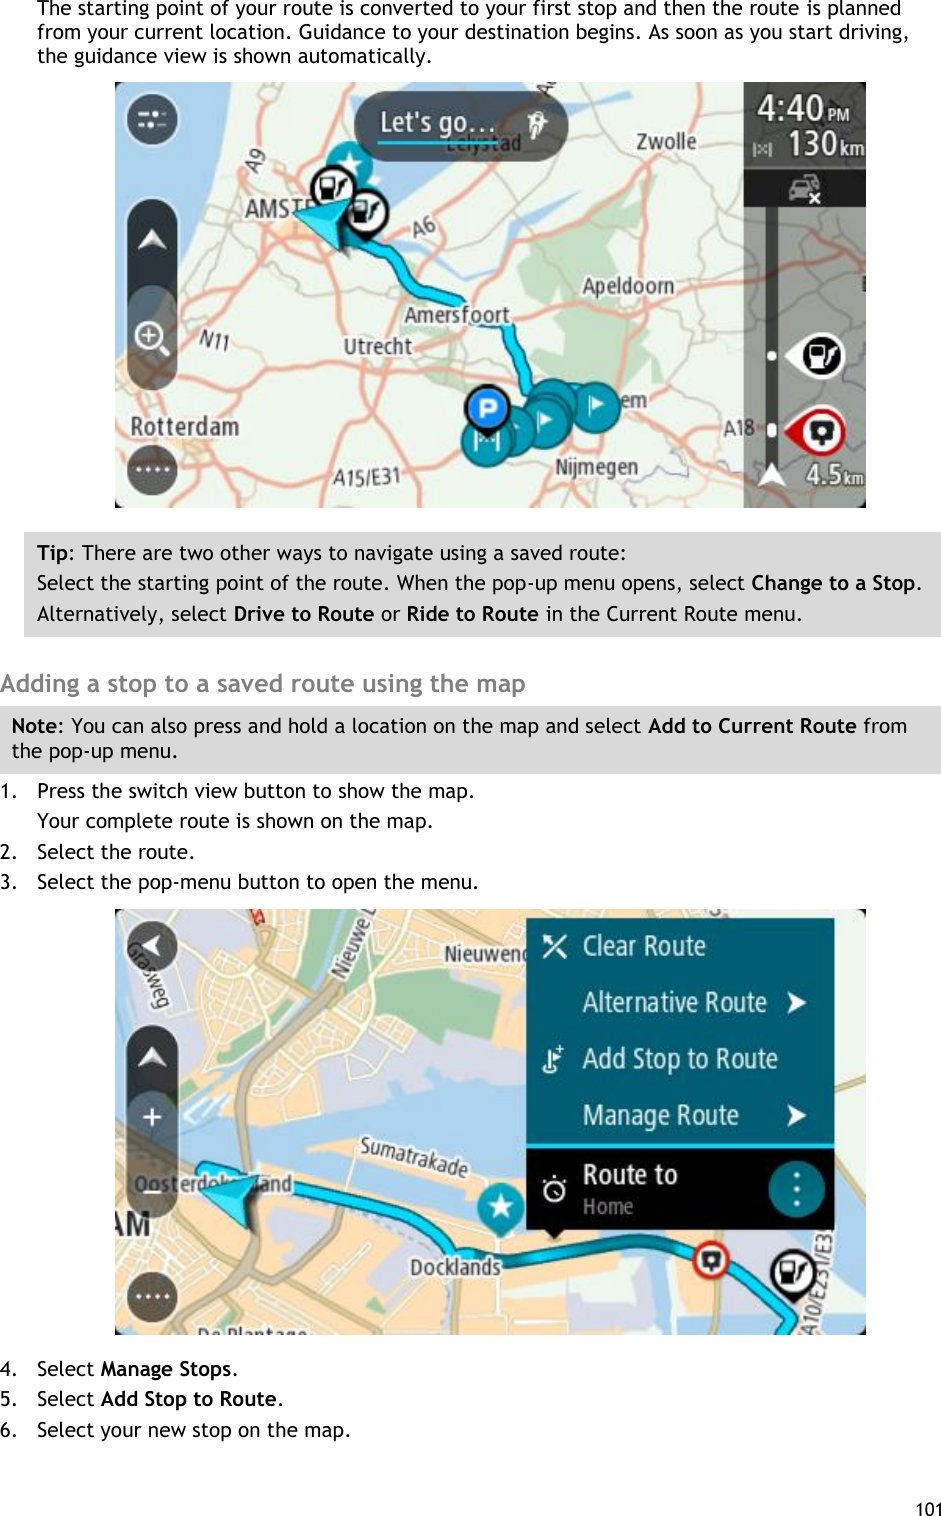  101  The starting point of your route is converted to your first stop and then the route is planned from your current location. Guidance to your destination begins. As soon as you start driving, the guidance view is shown automatically.  Tip: There are two other ways to navigate using a saved route: Select the starting point of the route. When the pop-up menu opens, select Change to a Stop. Alternatively, select Drive to Route or Ride to Route in the Current Route menu.  Adding a stop to a saved route using the map Note: You can also press and hold a location on the map and select Add to Current Route from the pop-up menu. 1. Press the switch view button to show the map. Your complete route is shown on the map. 2. Select the route. 3. Select the pop-menu button to open the menu.  4. Select Manage Stops. 5. Select Add Stop to Route. 6. Select your new stop on the map. 